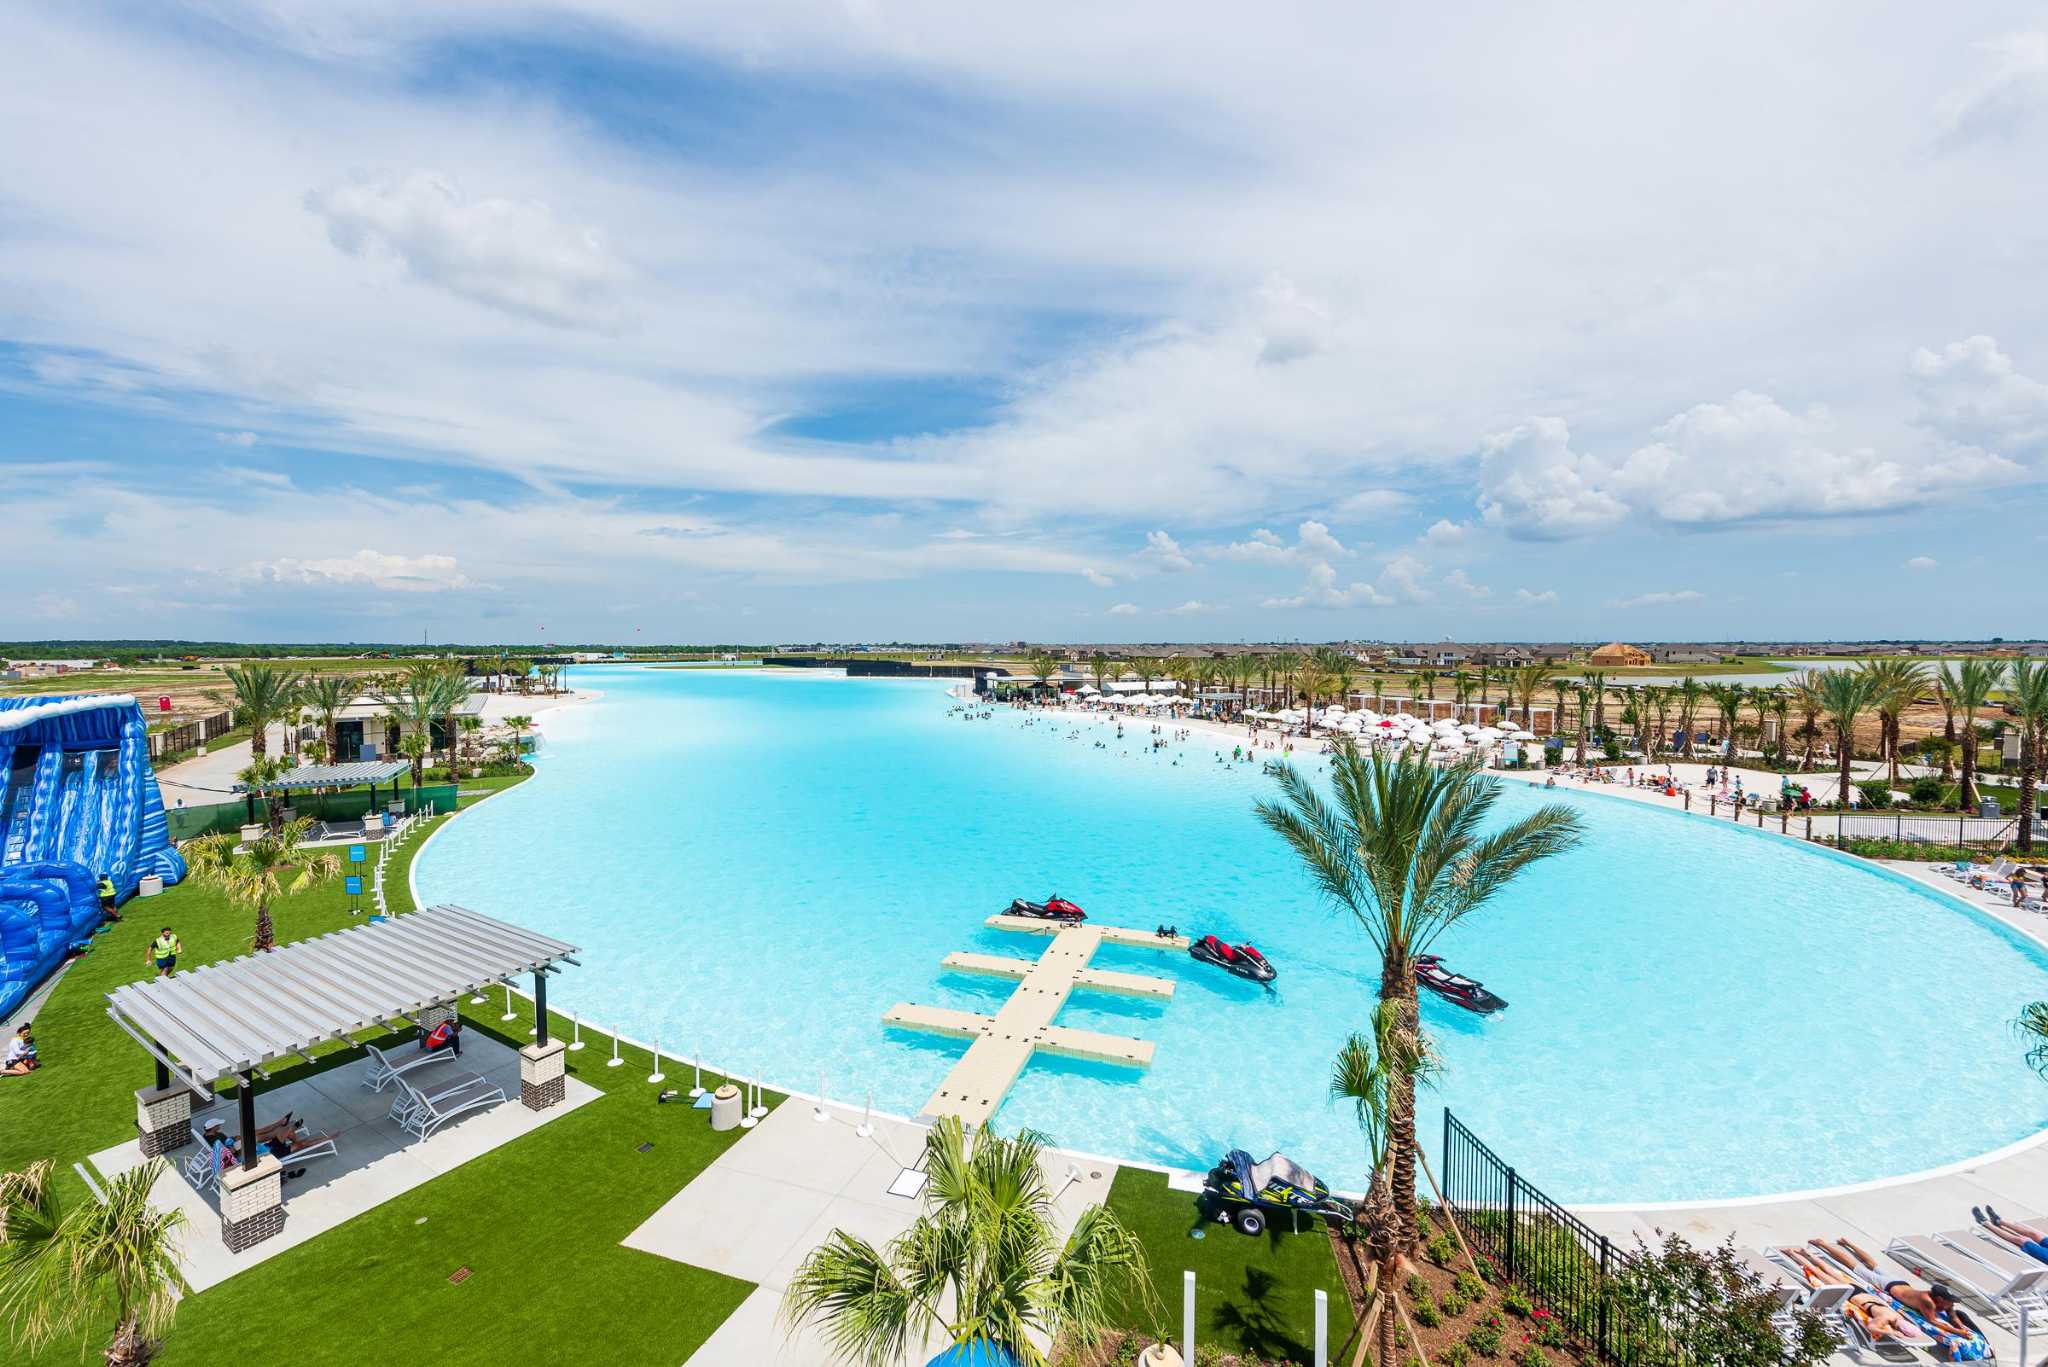 Spring break tickets on sale for Crystal Lagoon